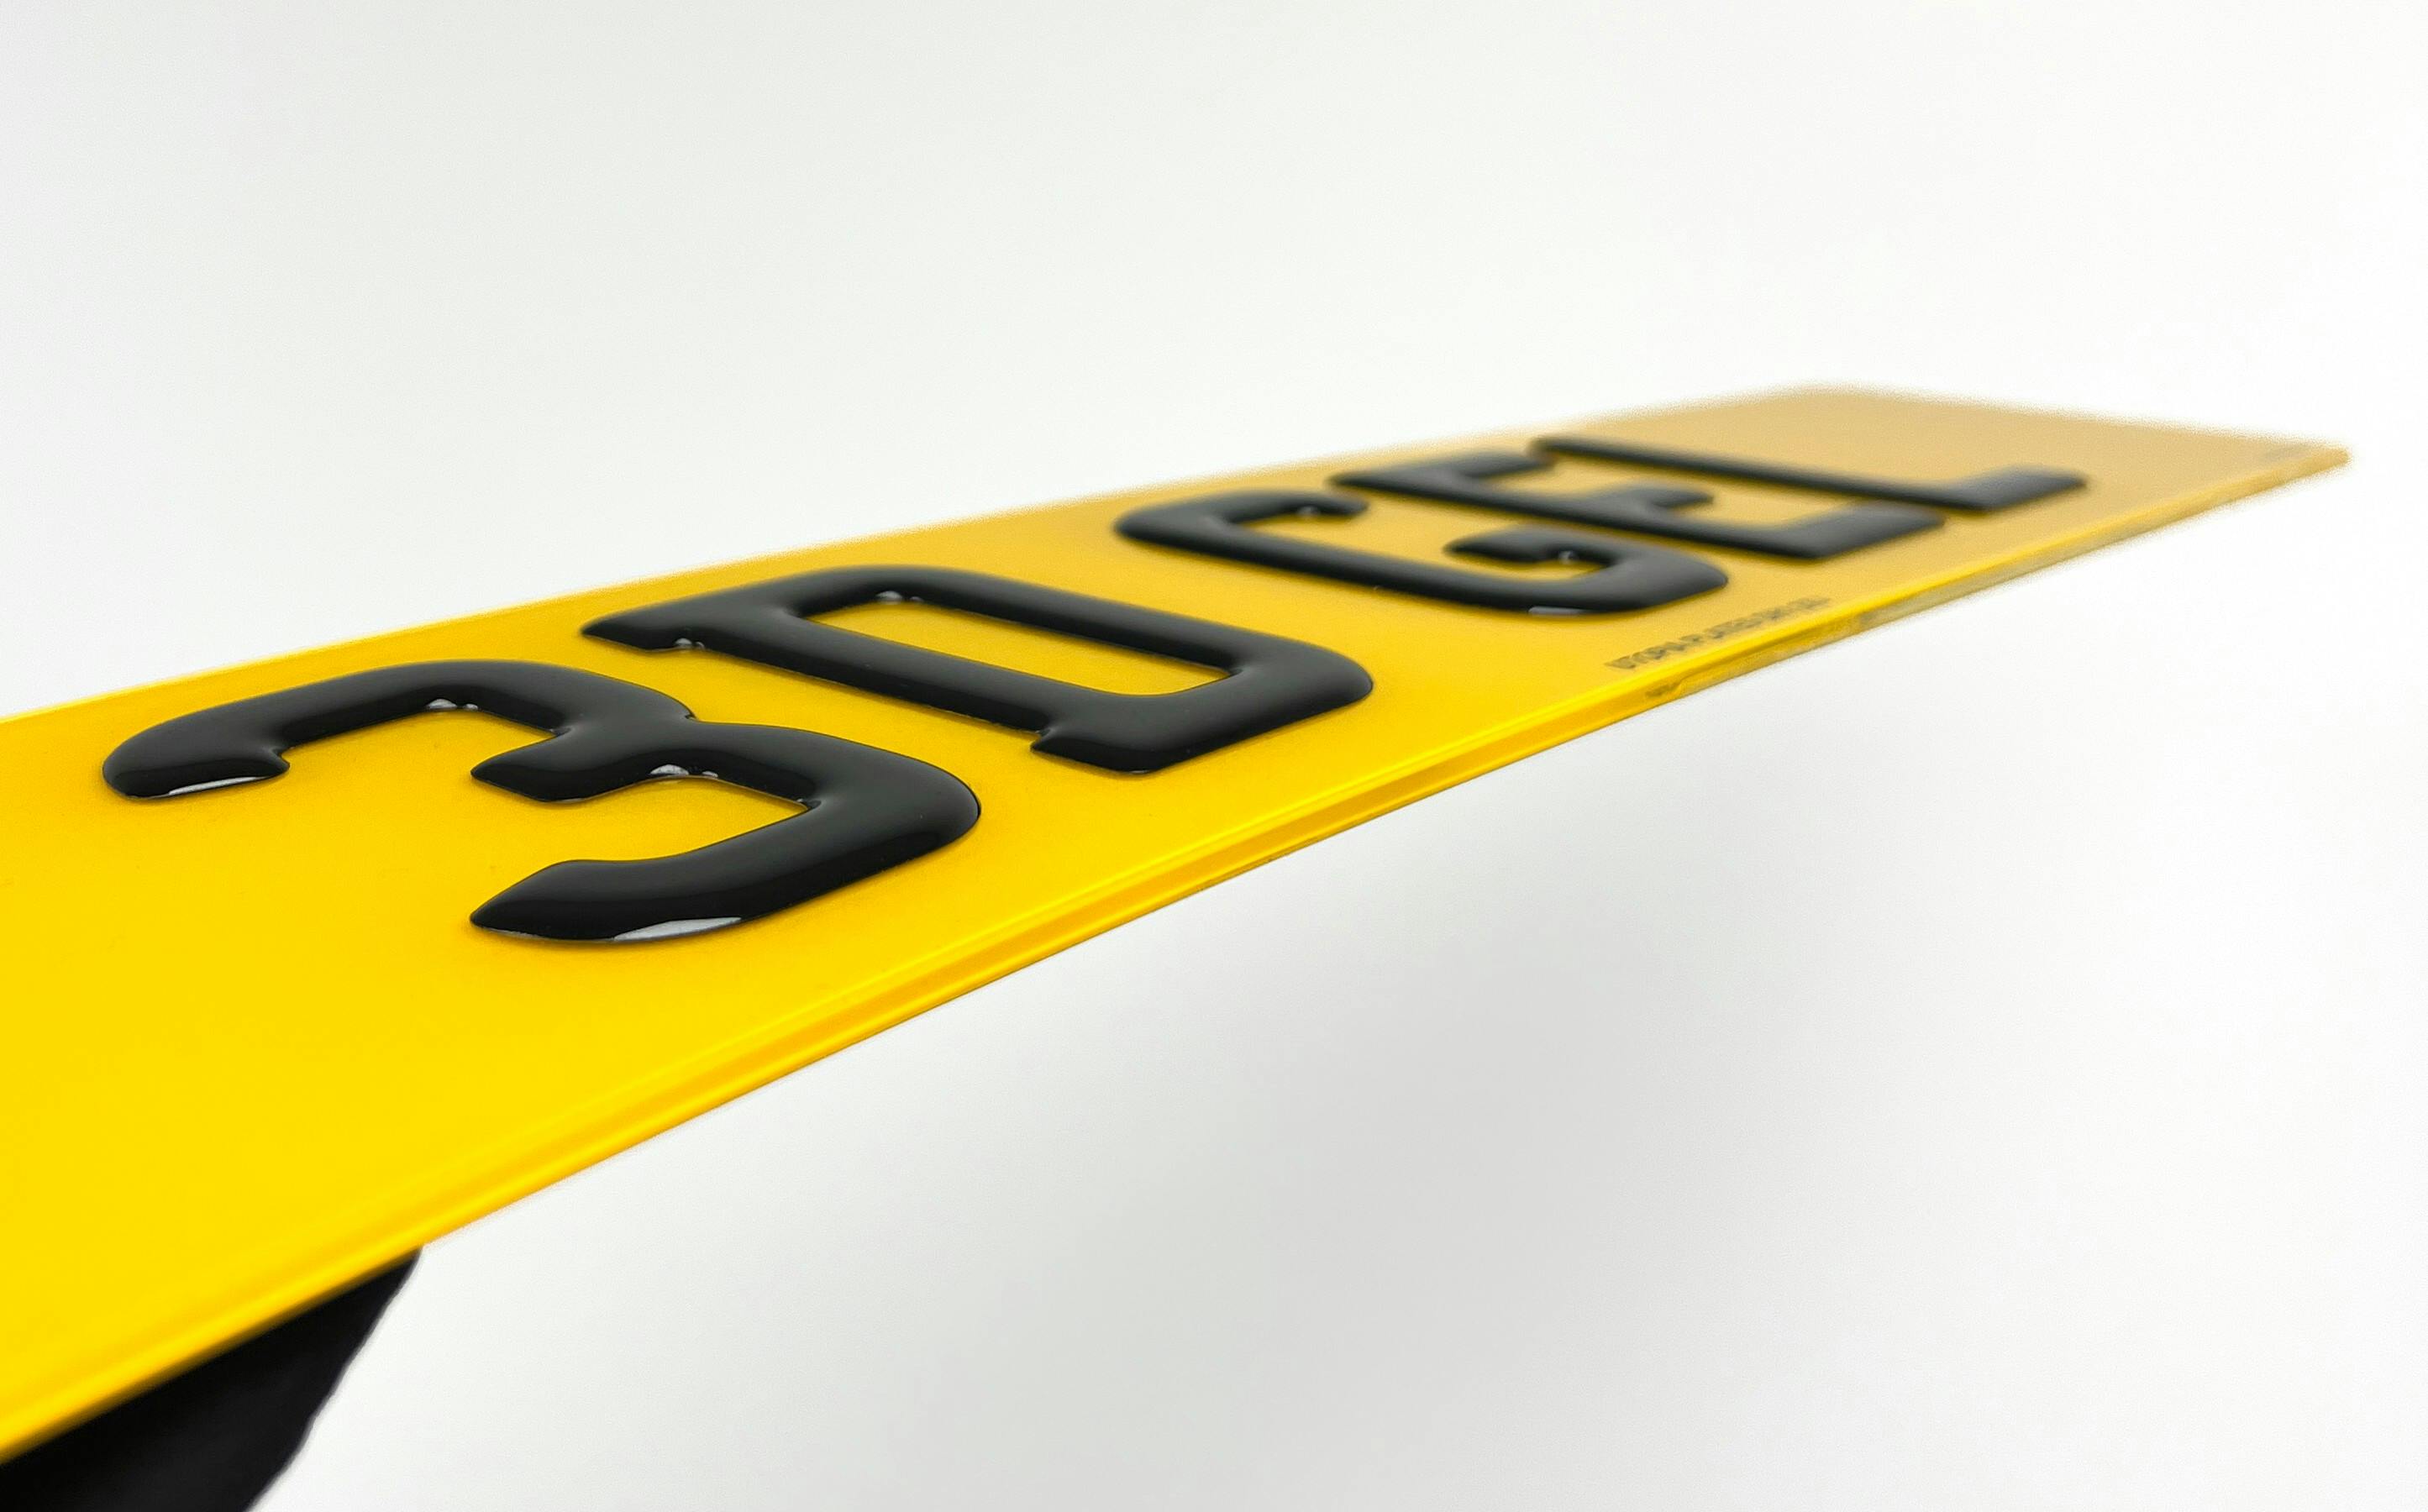 Are 4D Number Plates Made From Gel or Acrylic? 4D Gel Plates - Bespoke  Plates